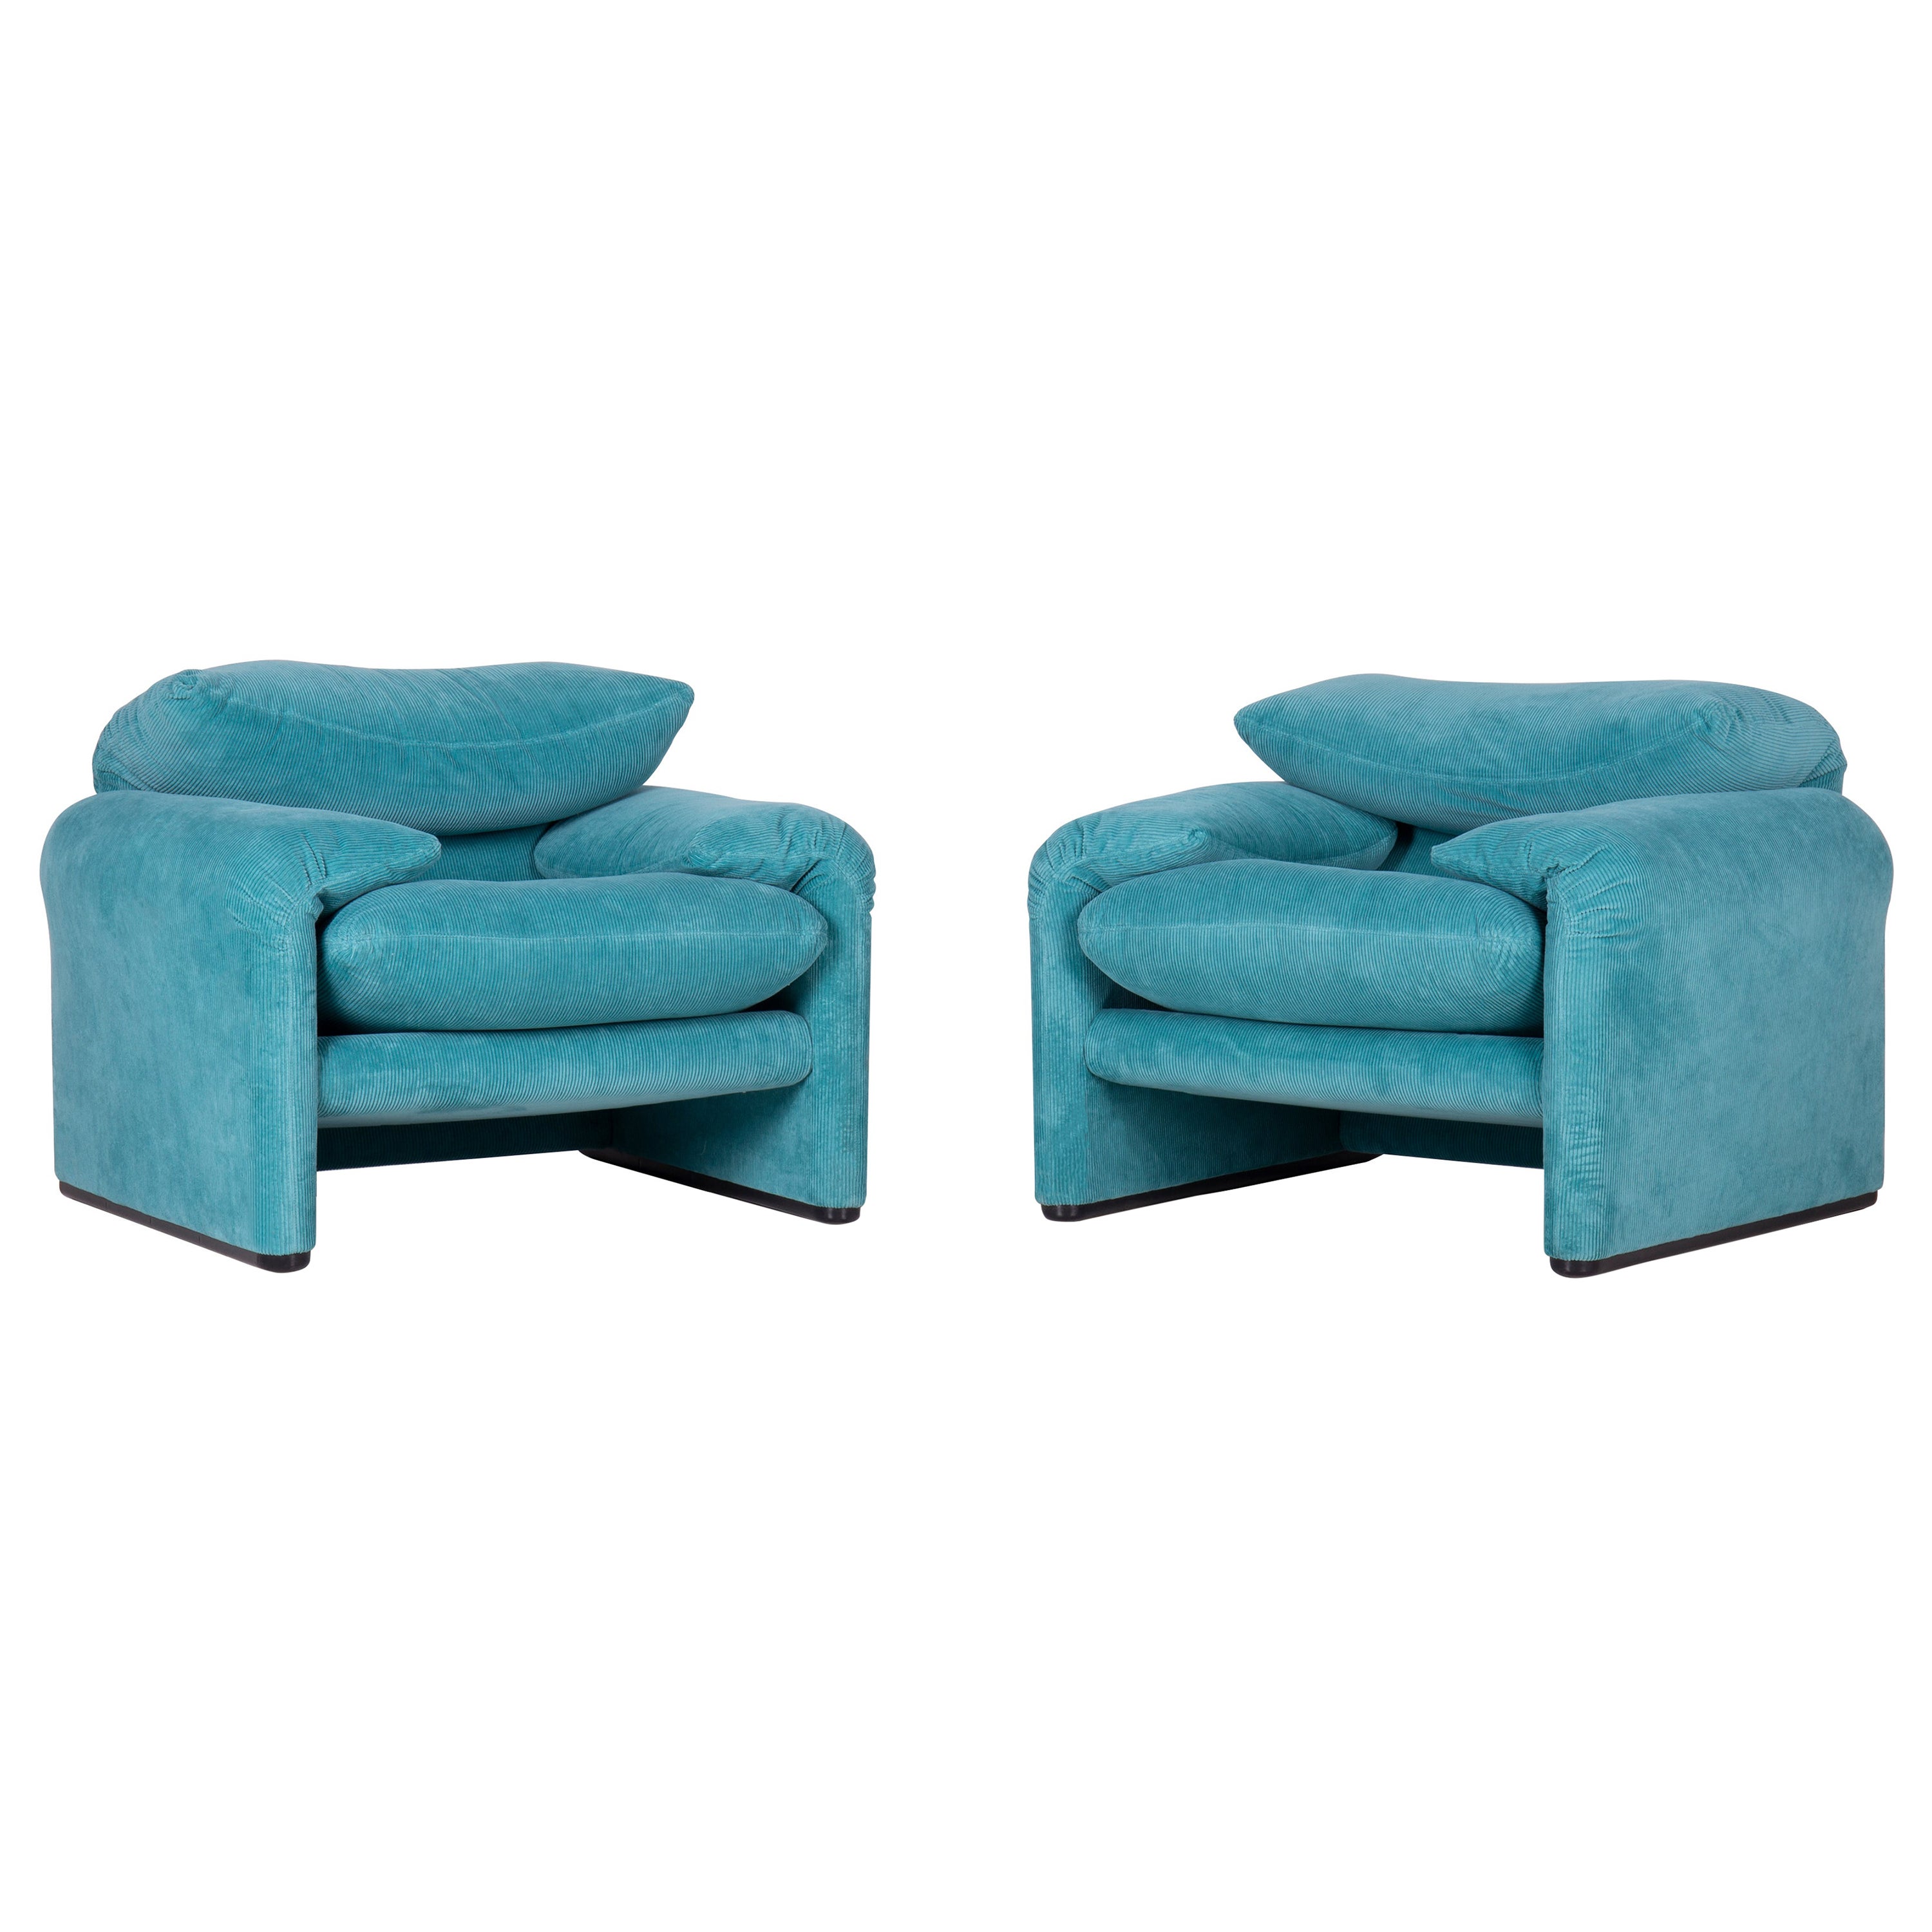 Pair of Maralunga Armchairs by Vico Magistretti in Ocean Green Corduroy For Sale